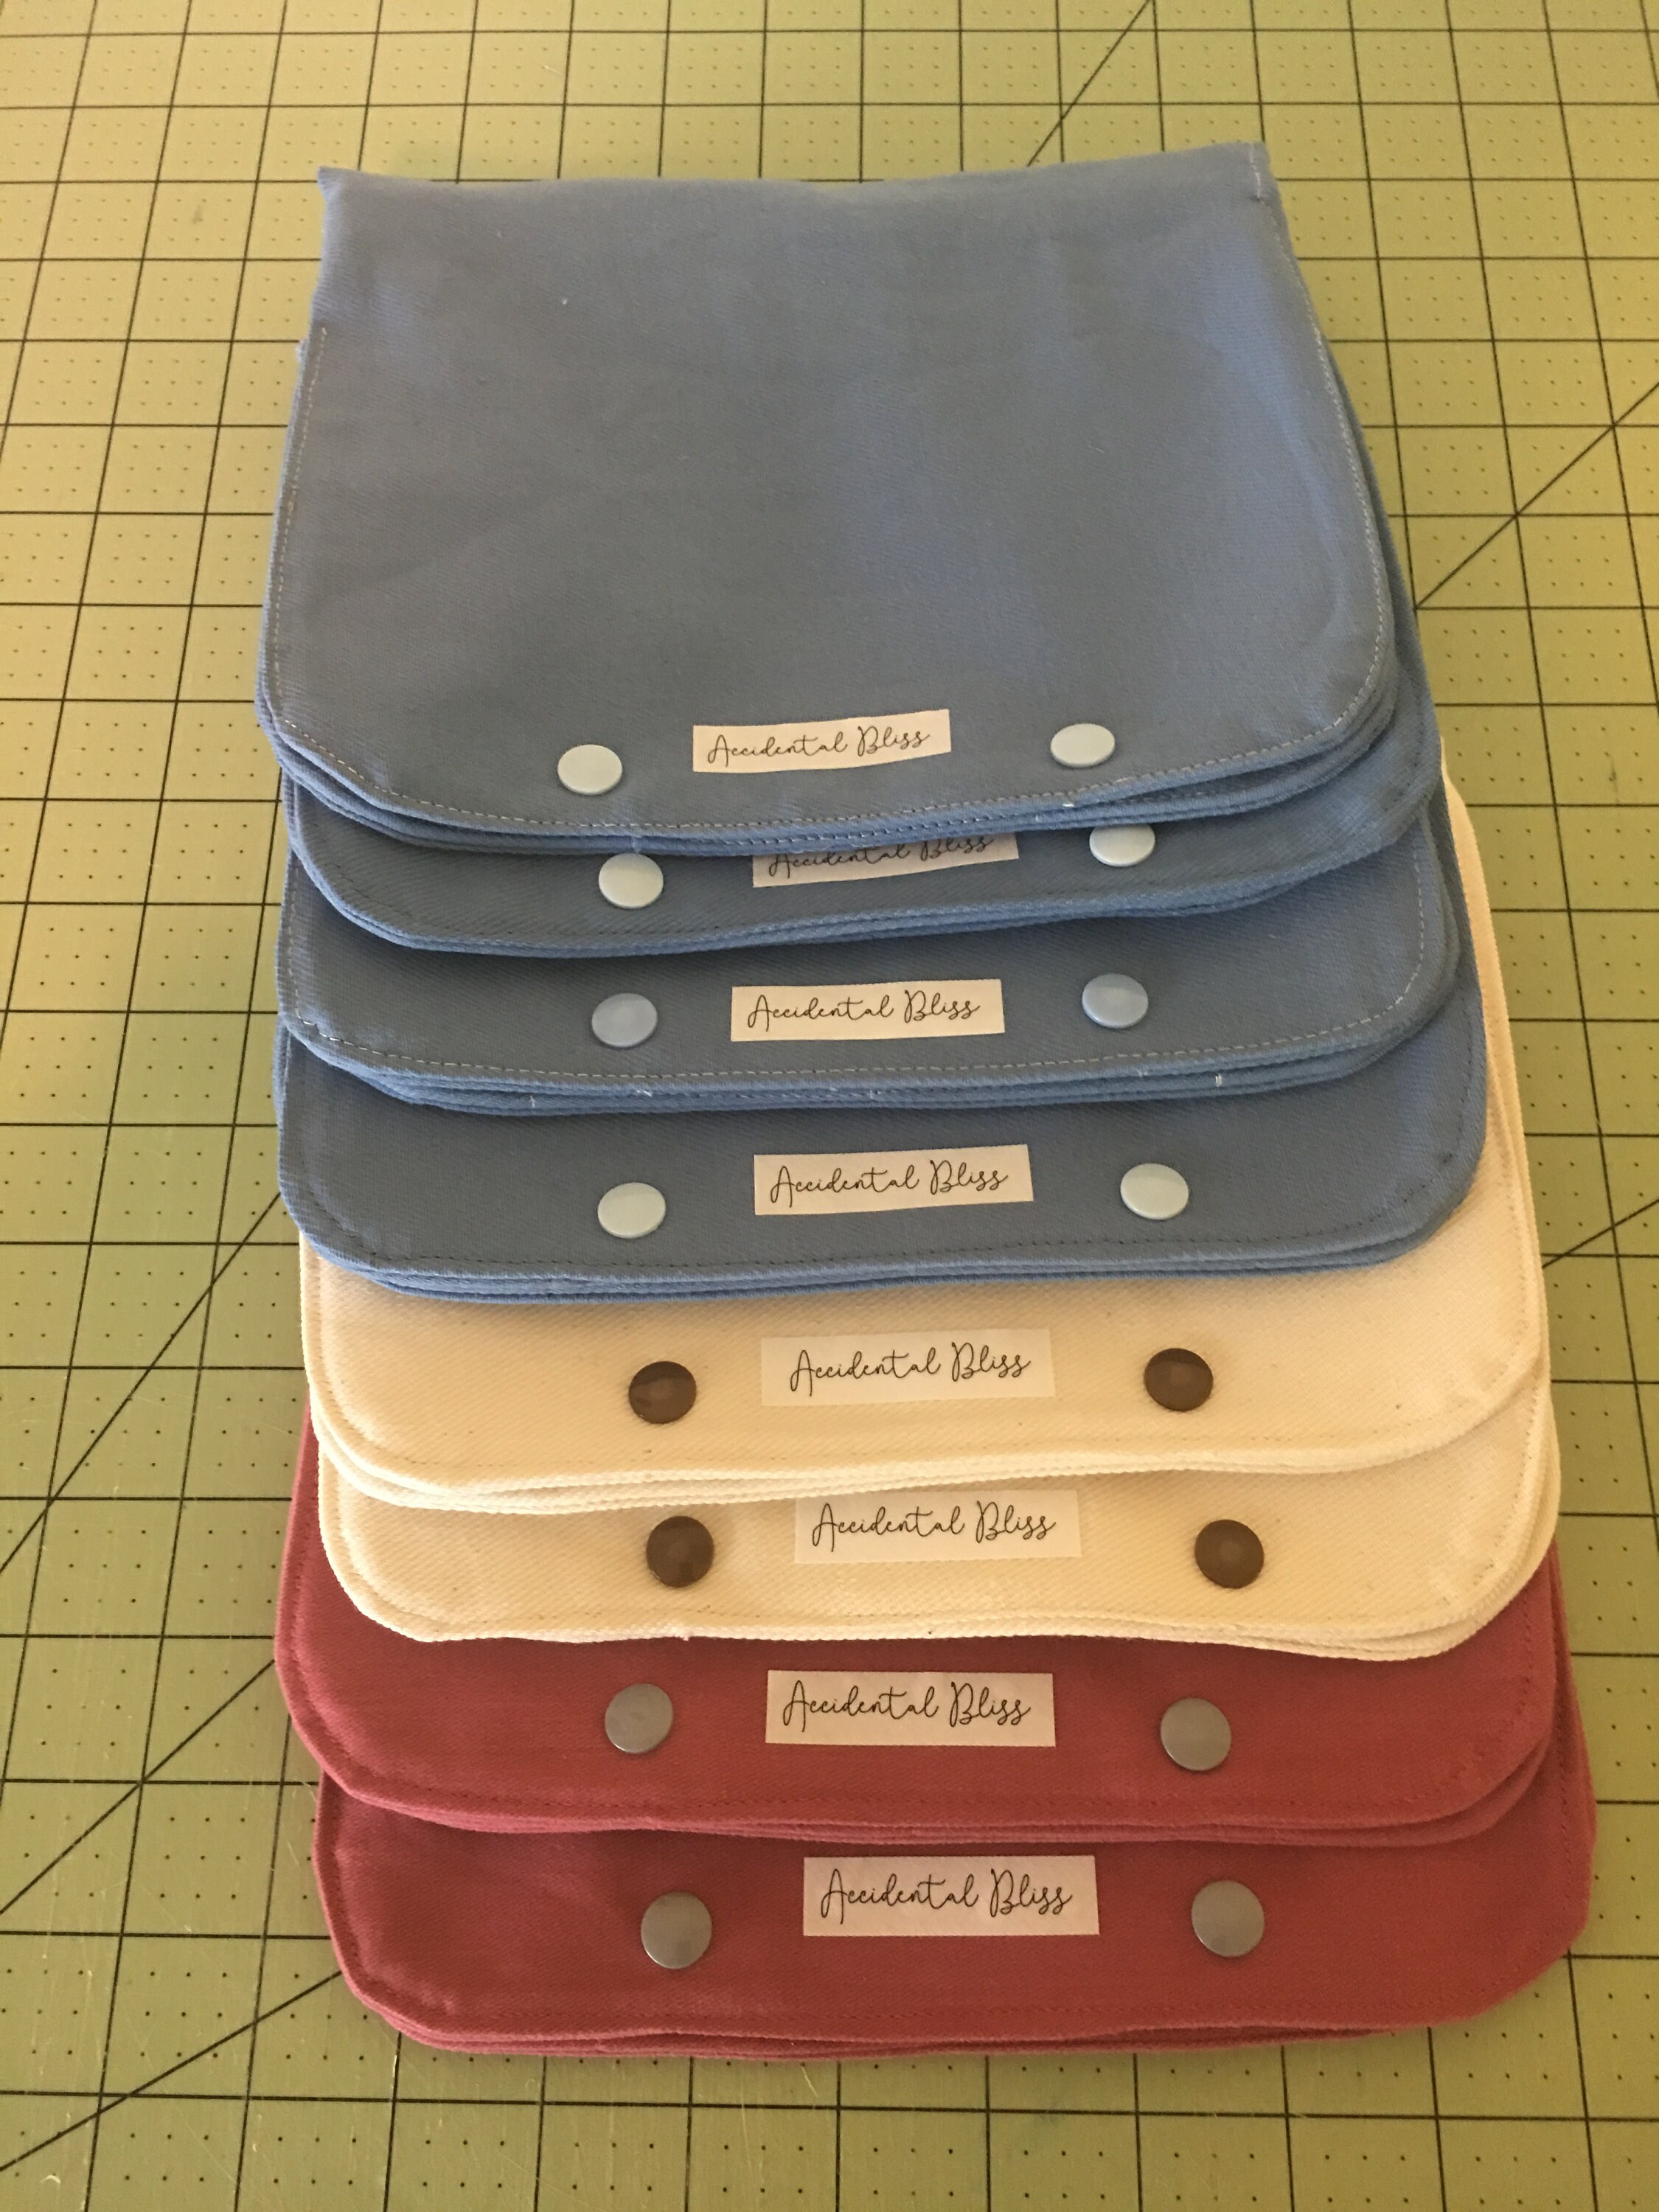 SEWING NOTION CARRYING CASE - KSOF  Karen's School of Fashion Sewing and  Fashion Design in NY and NJ